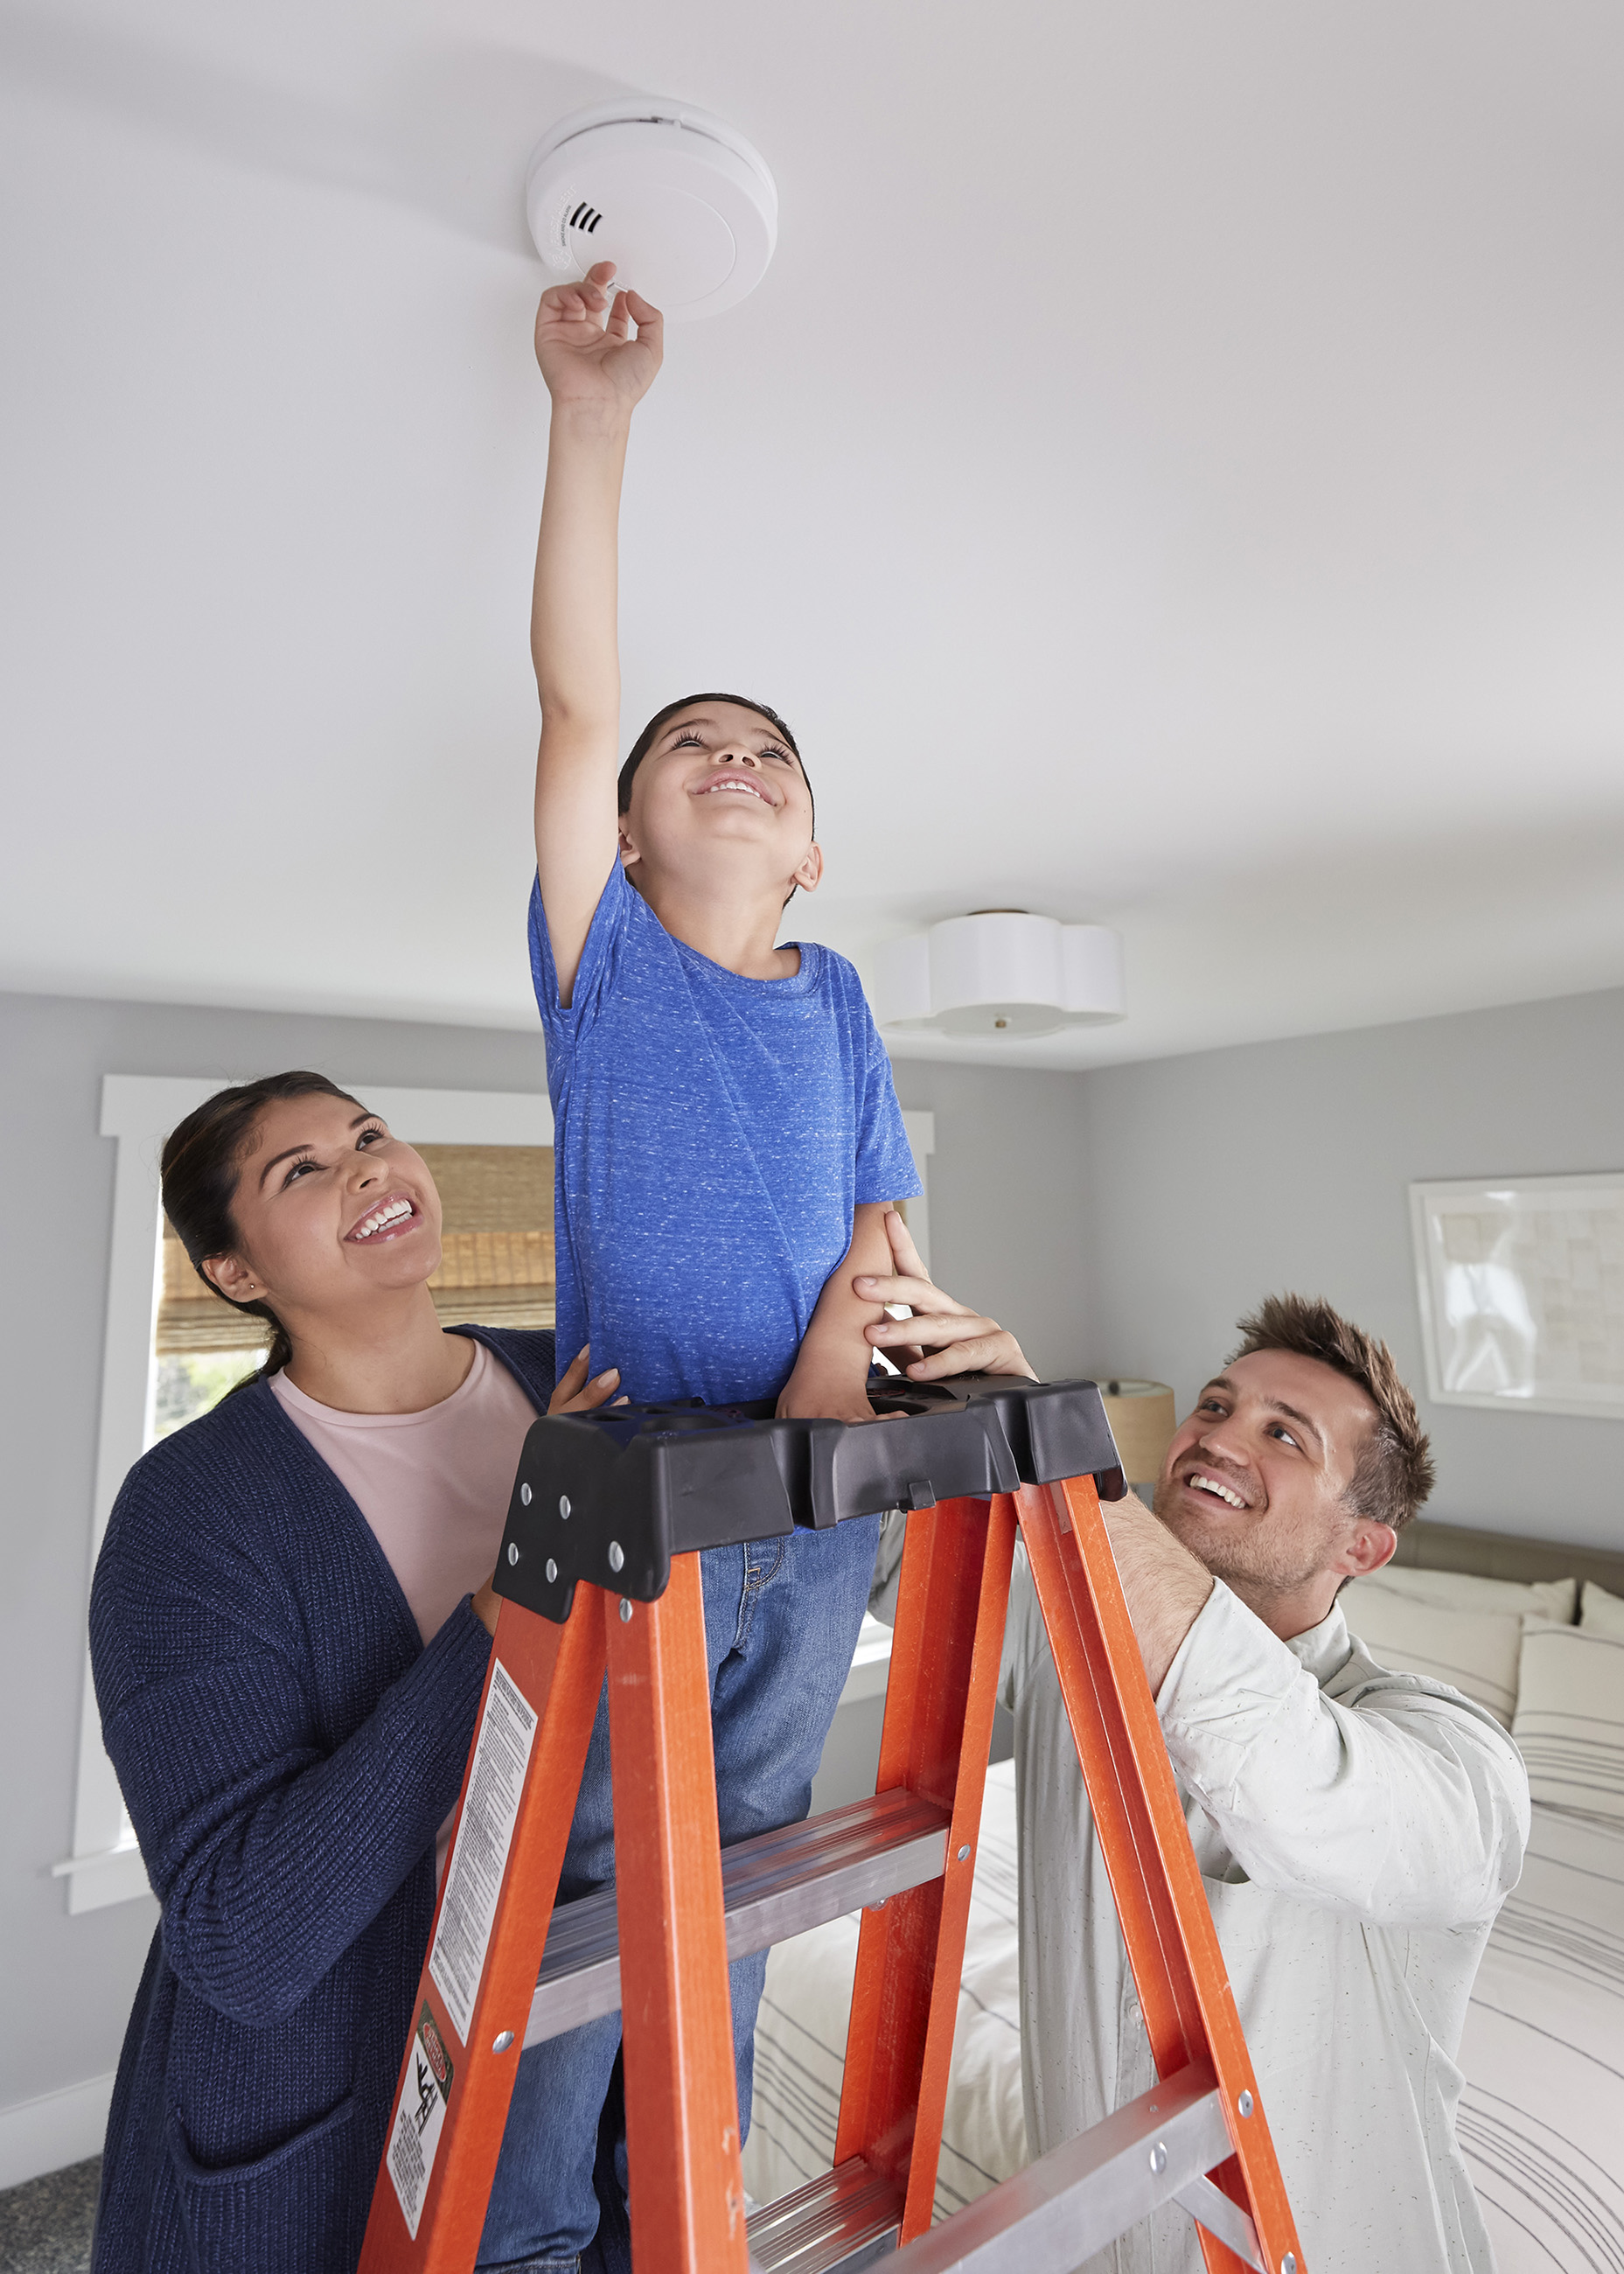 Practice Home Safety with Your Family